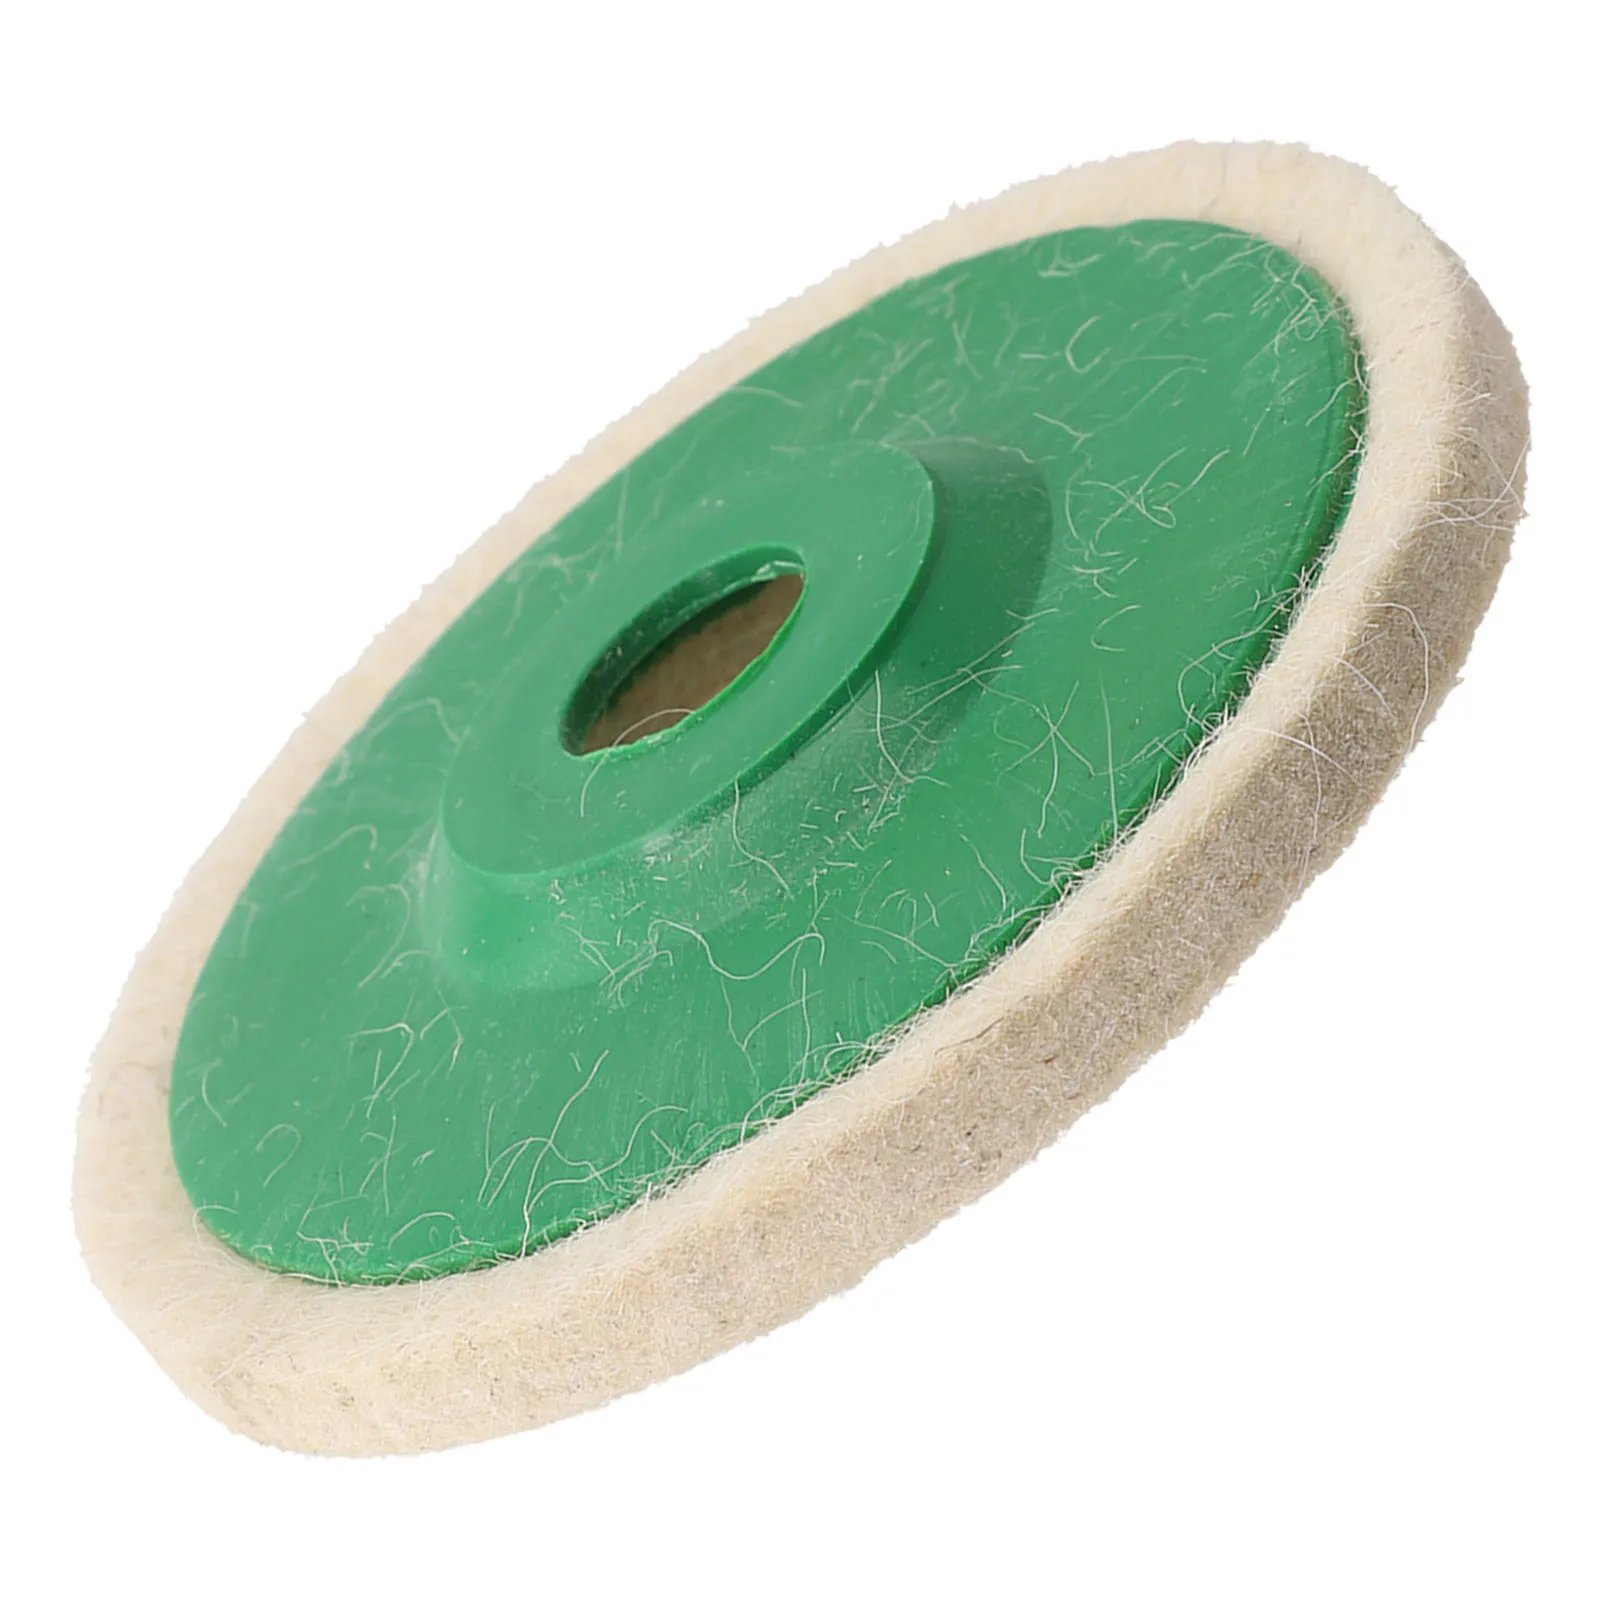 10 pcs wool polishing wheel buffing pads angle grinder wheel felt polishing pad disc angle grinder accessories for car maintain 1 Pc 5Inch Wool Polishing Wheels Buffing Pads Angle Grinder Accessories Grinding Disc For Metal Glass Ceramic Polishing Tools